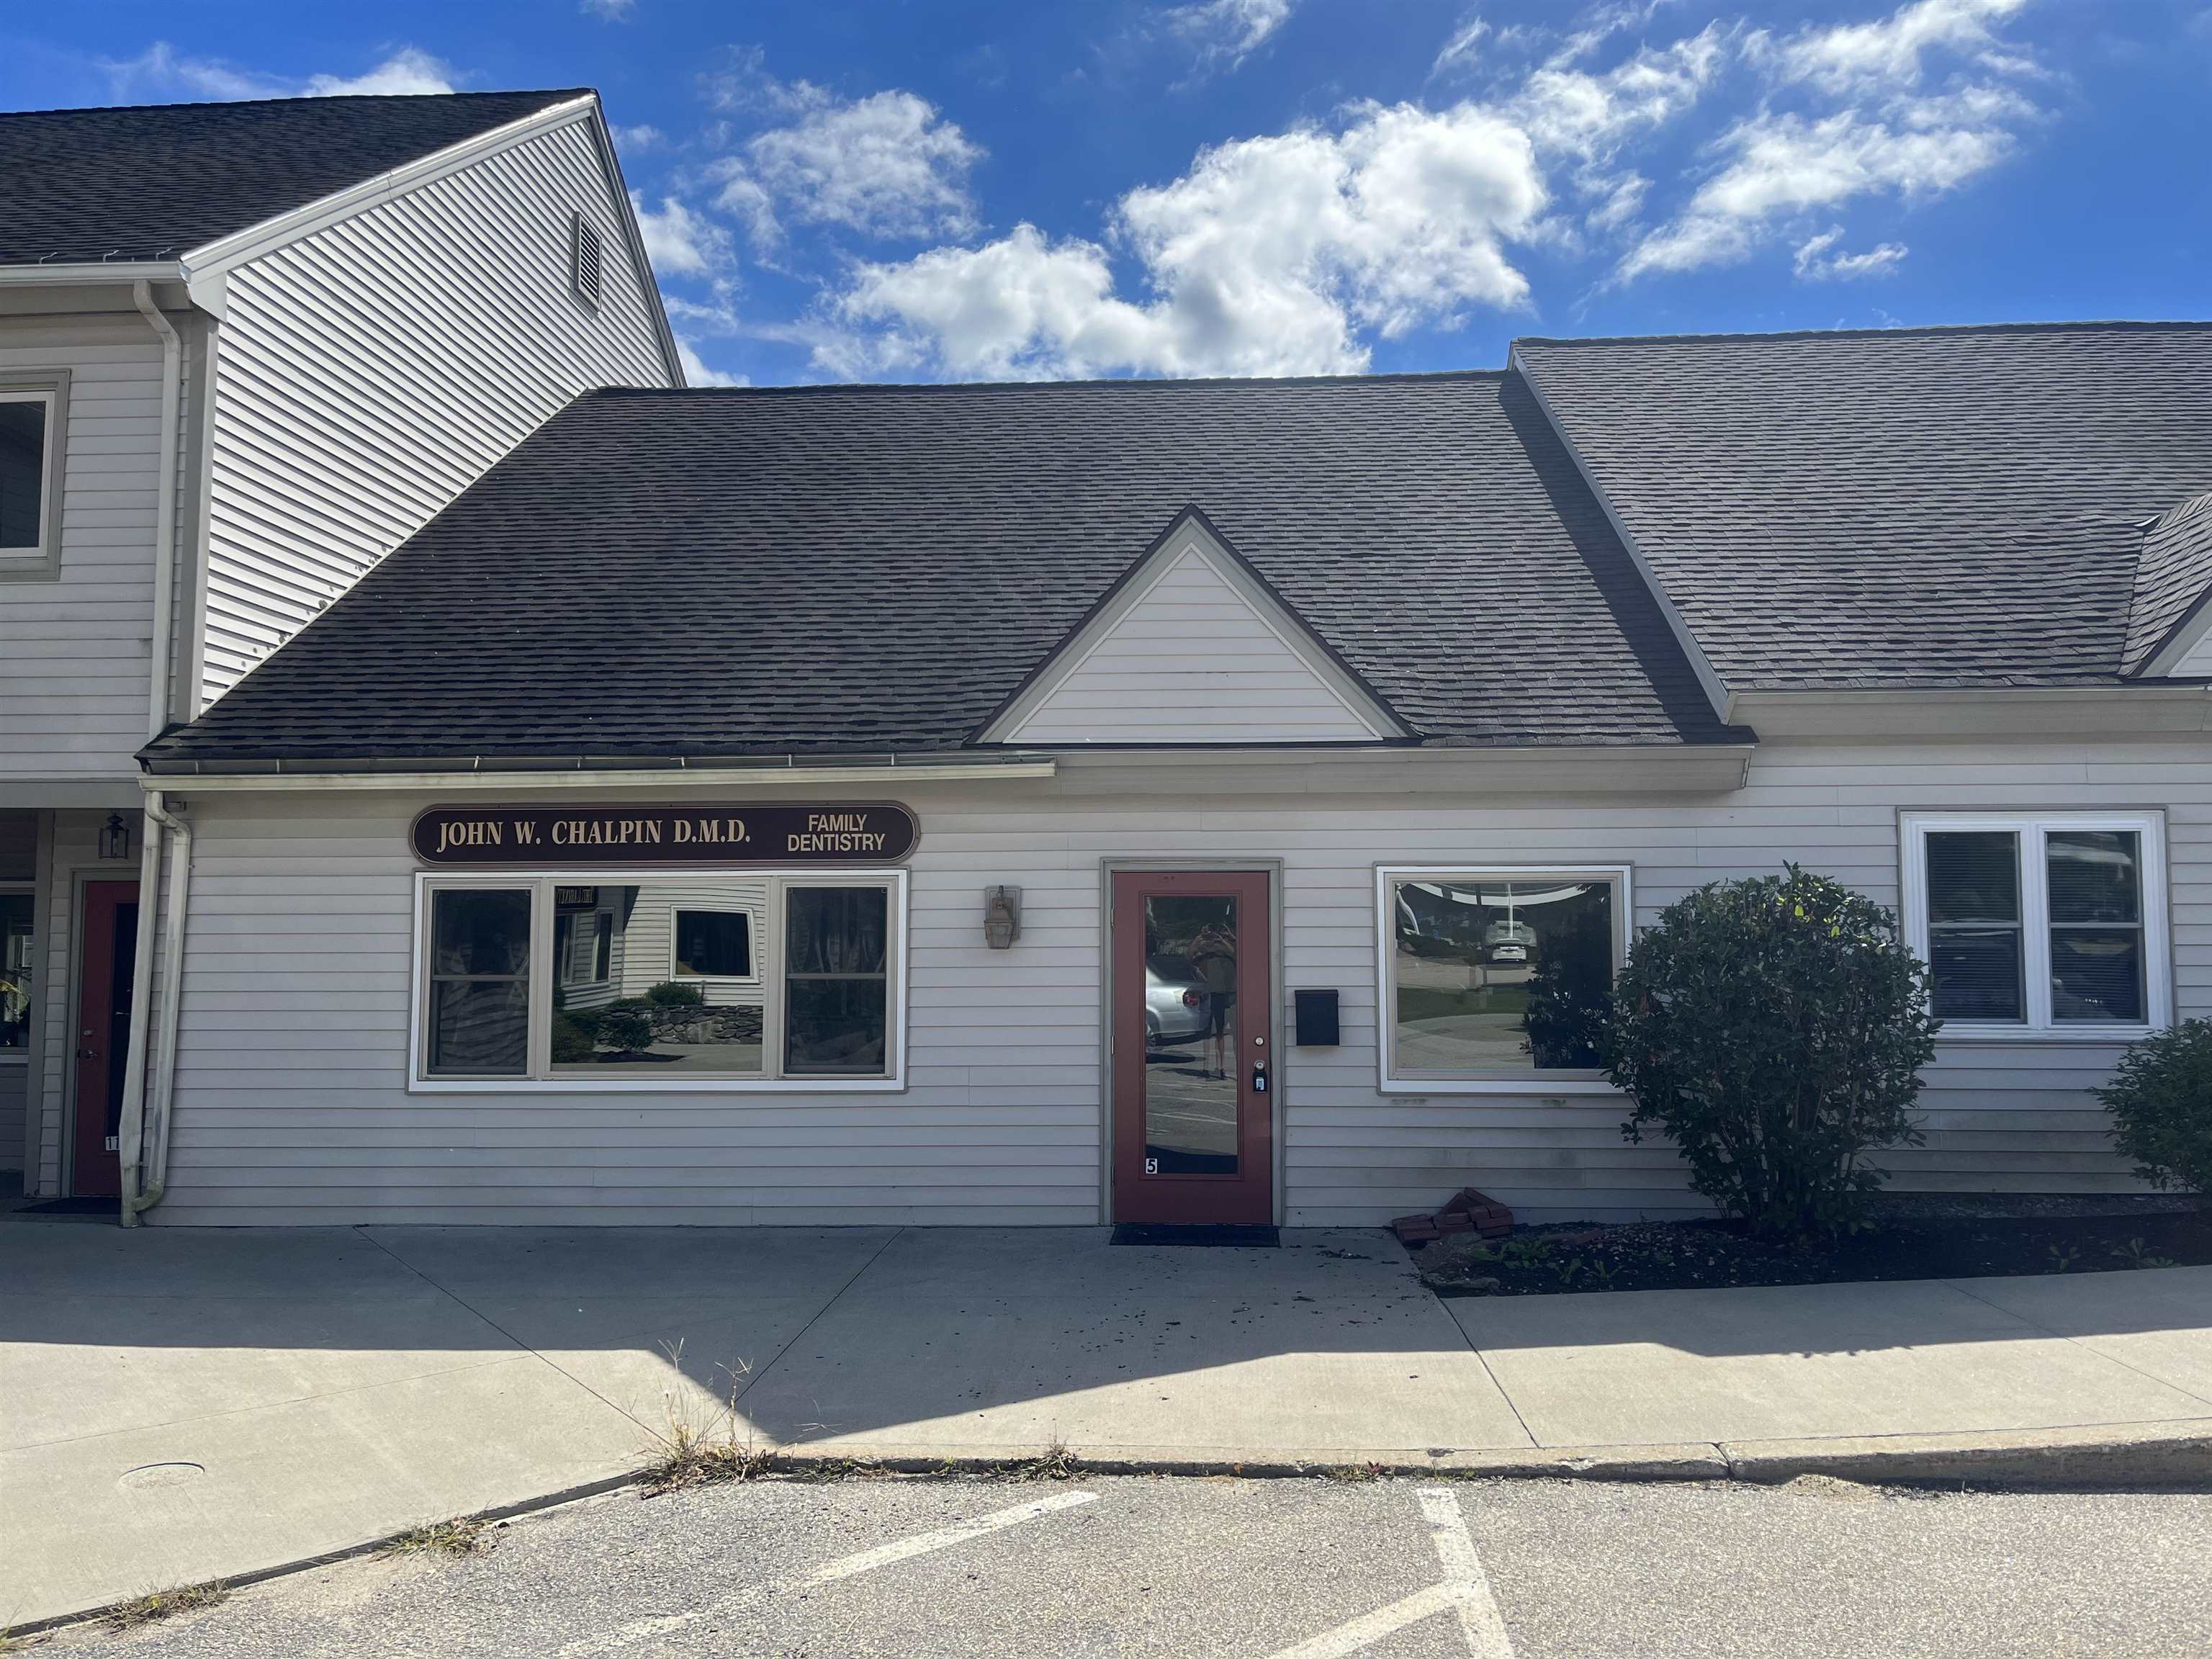 Stratham NH Commercial Property for sale $200,000 